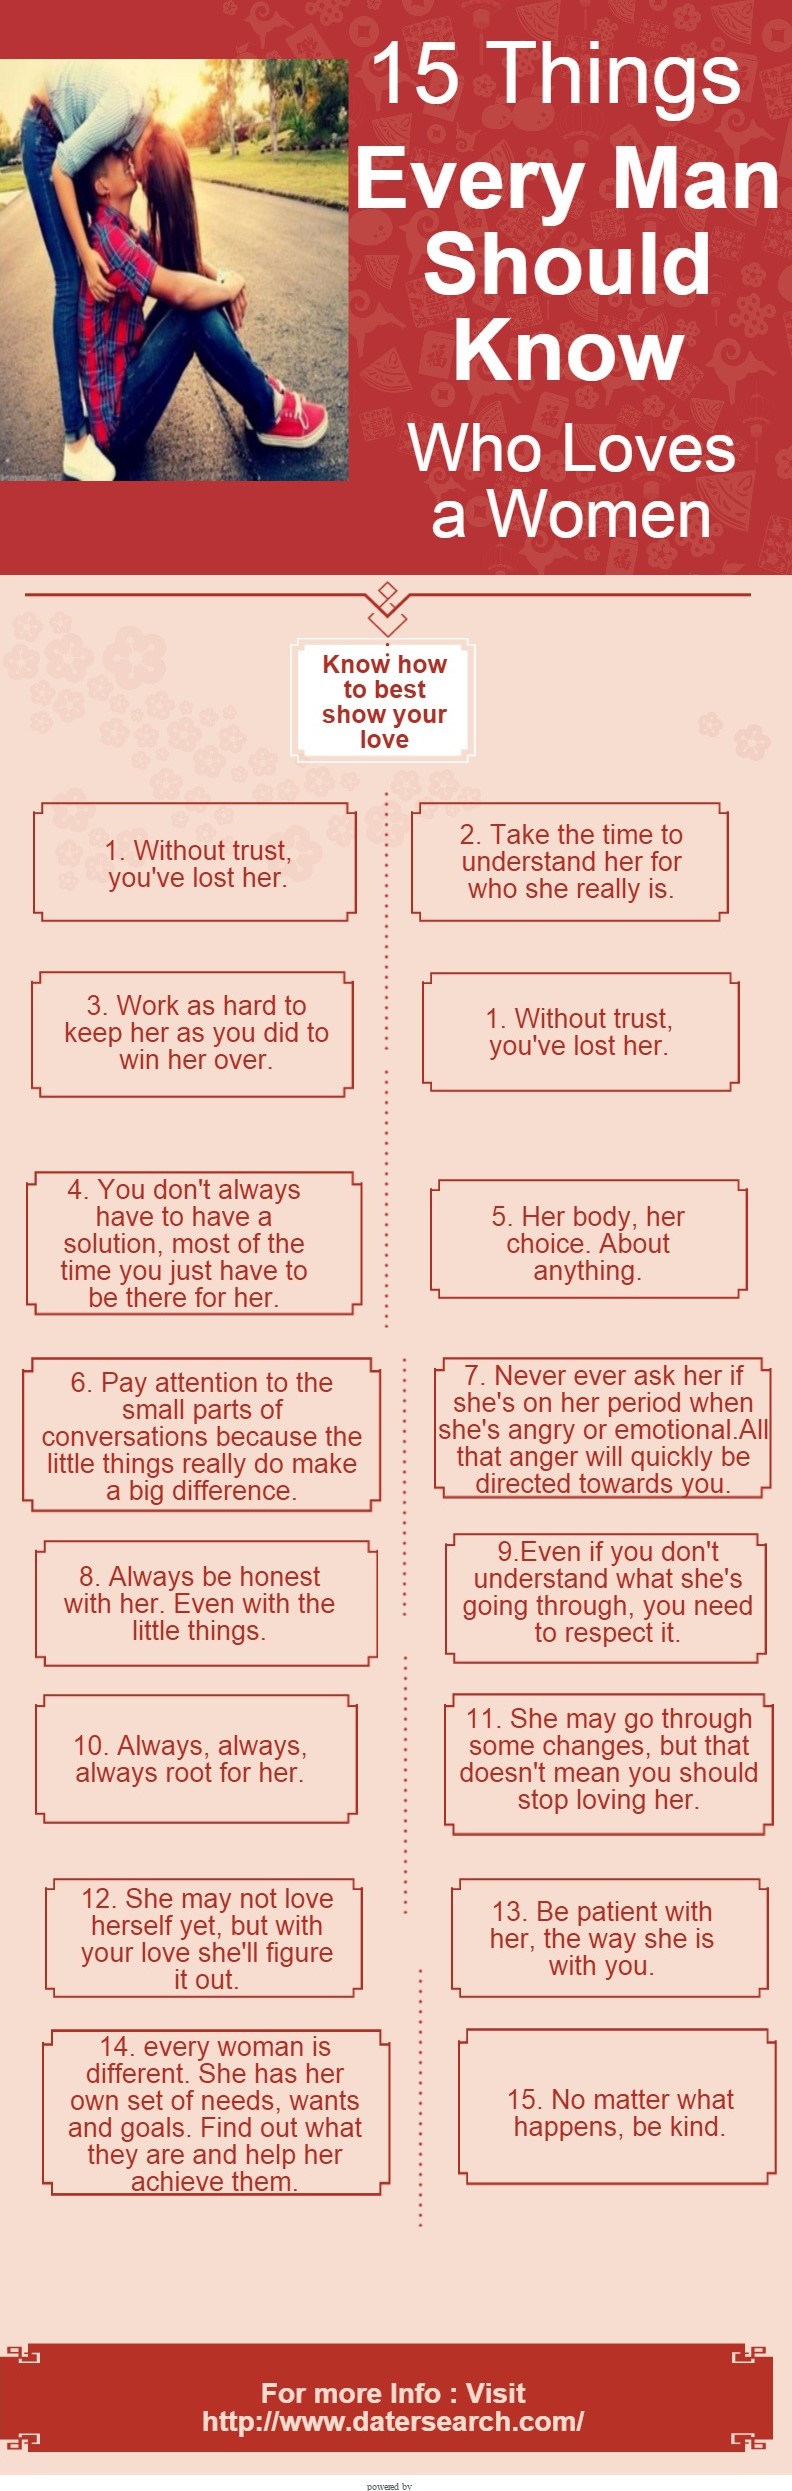 10 Things Every Woman Should Know